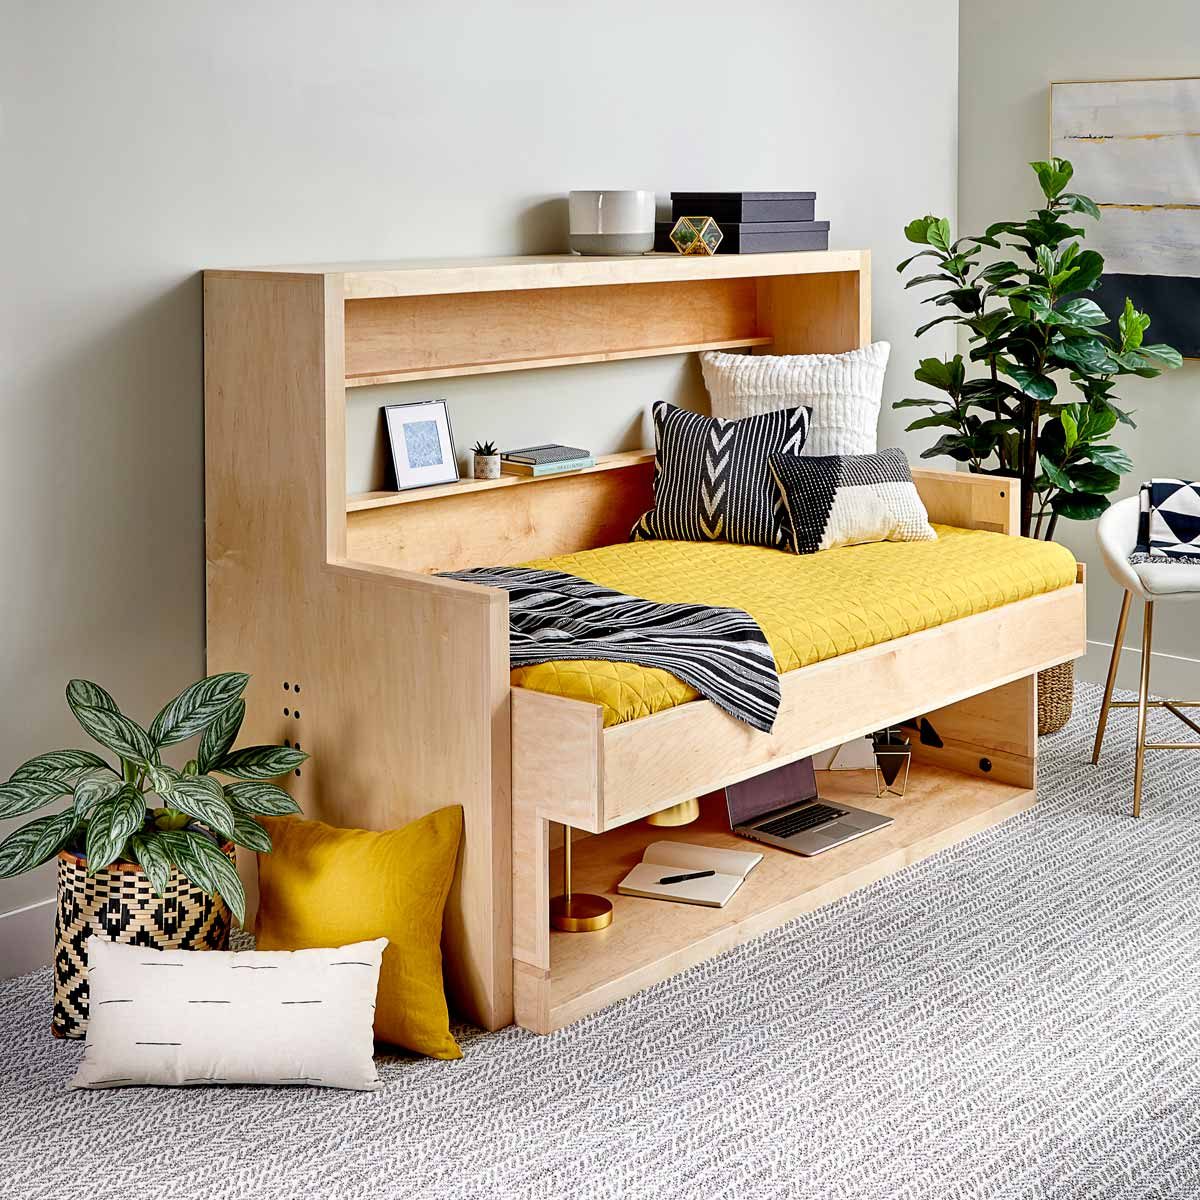 How to Build a Murphy Bed that Easily Transforms into a ...